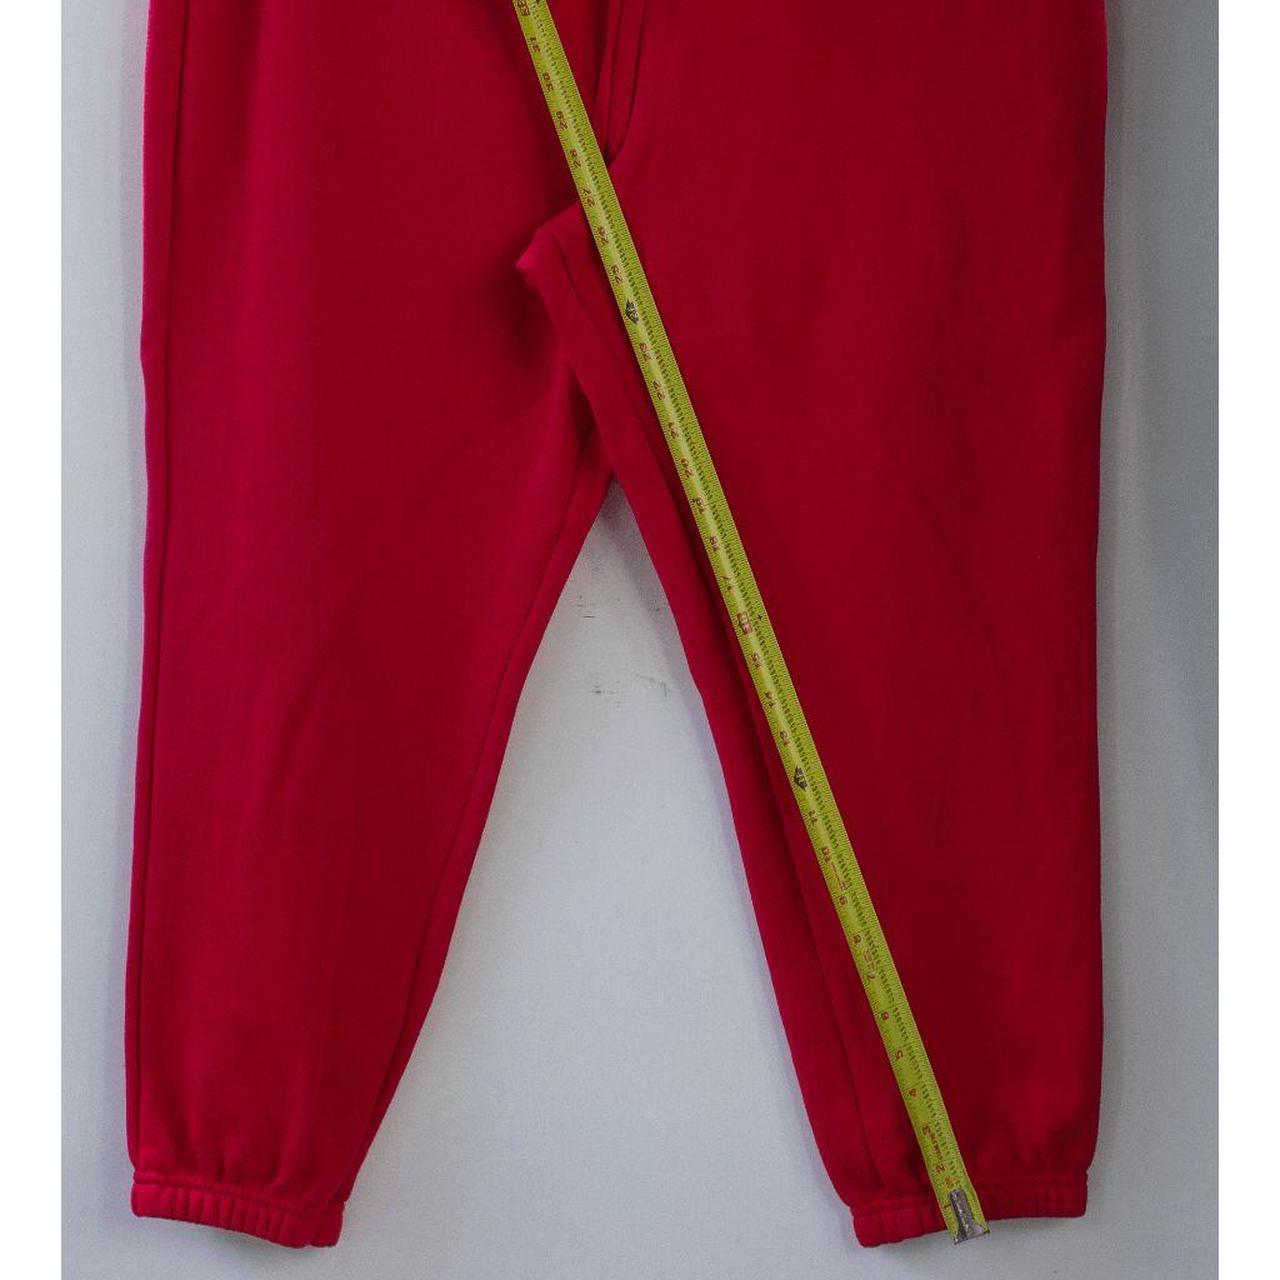 Fabletics Velour Tracksuits for Women